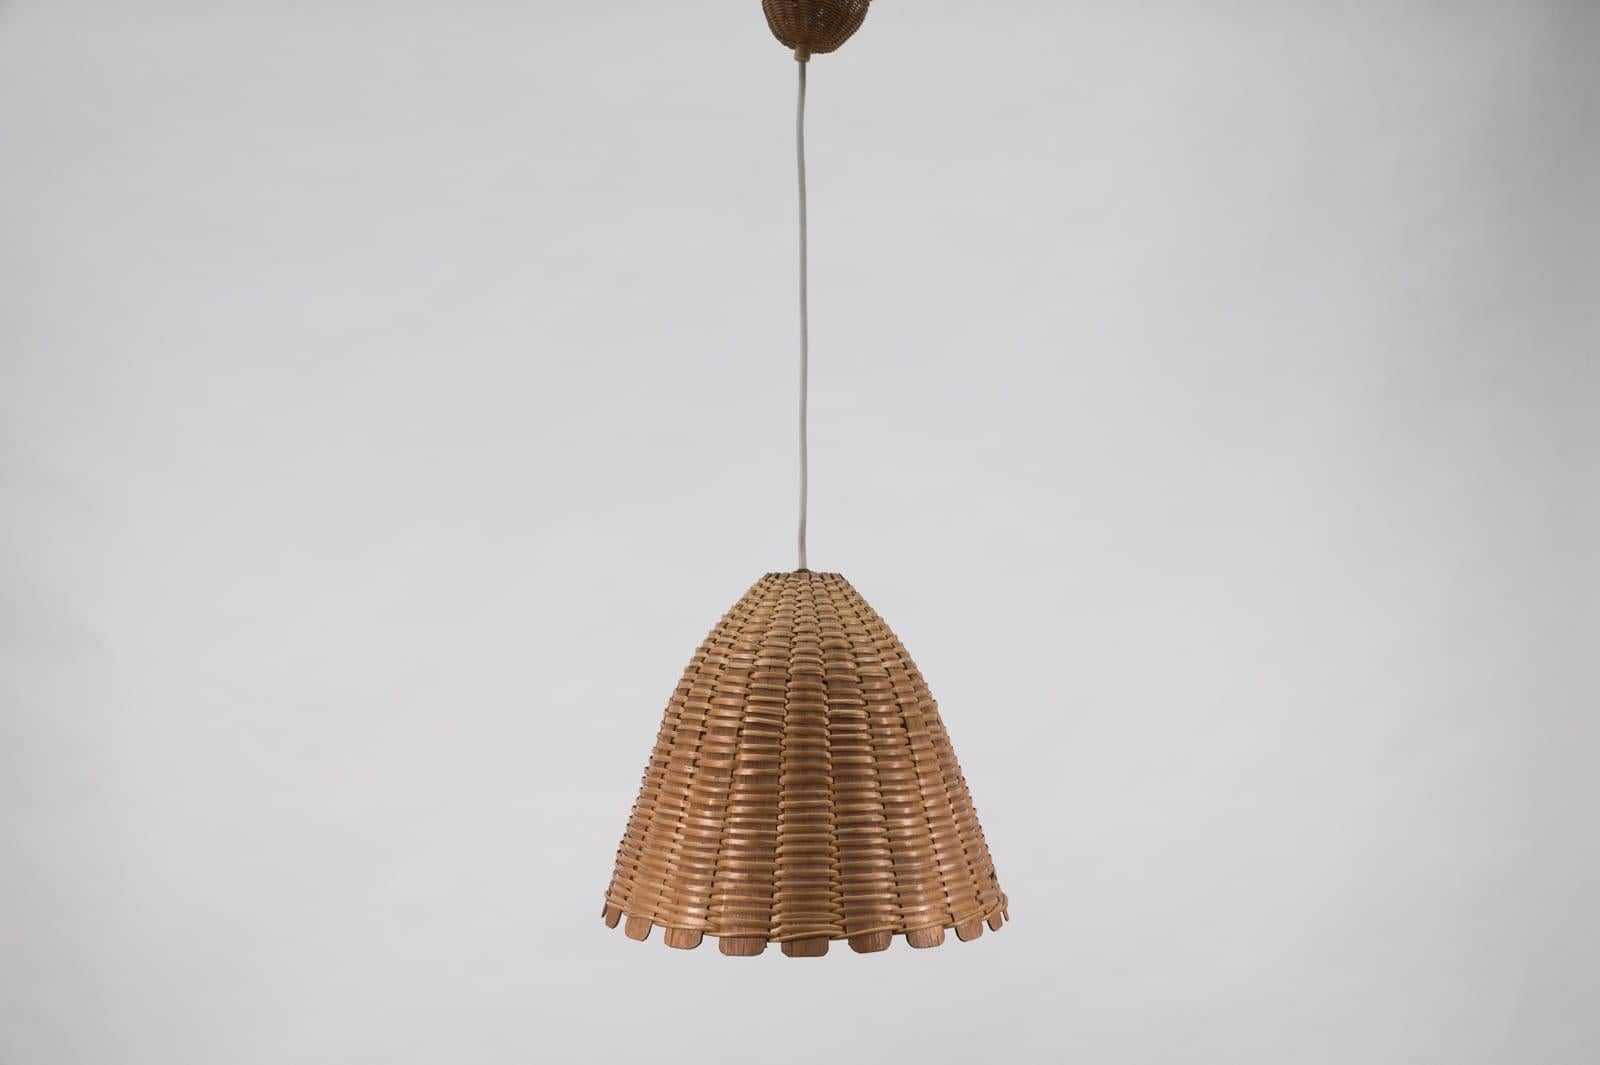 Lovely decorative Mid-Century Modern lamp. Manufactured in Italy, 1960s.

Executed in wicker, wood and metal and comes with 1 x E27 / E26 Edison screw fit bulb holder, is wired and in working condition. It runs both on 110/230 Volt.

Adjustable